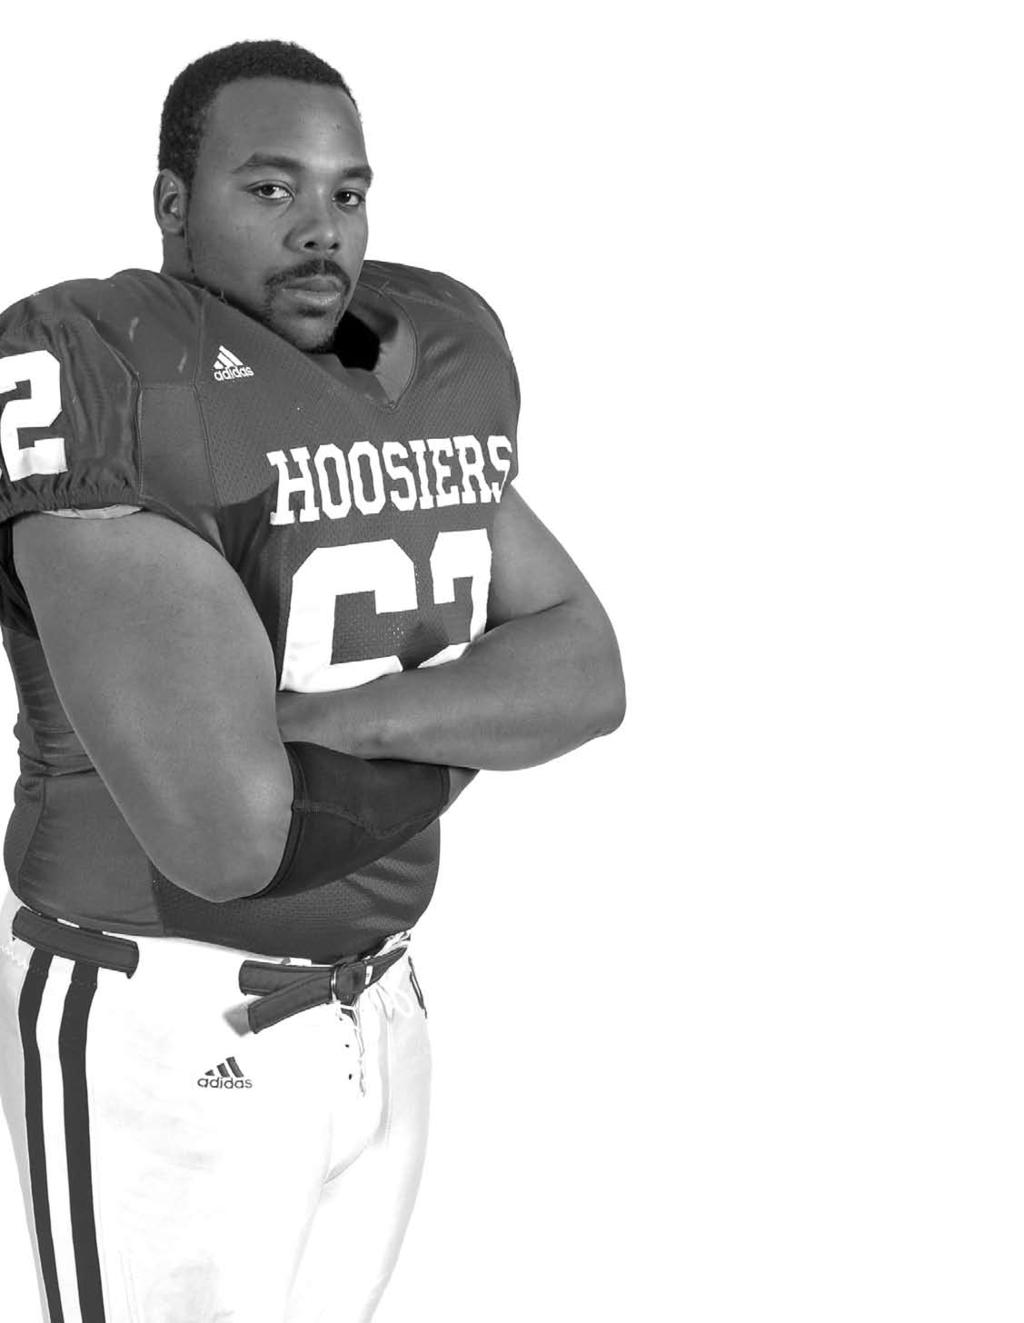 hoosiers INDIANA UNIVERSITY 2008 62 Greg Brown Defensive Tackle 6-2 300 Senior-5th Centerville, Ohio Centerville 2007 (JUNIOR): Started all 13 games at defensive tackle.